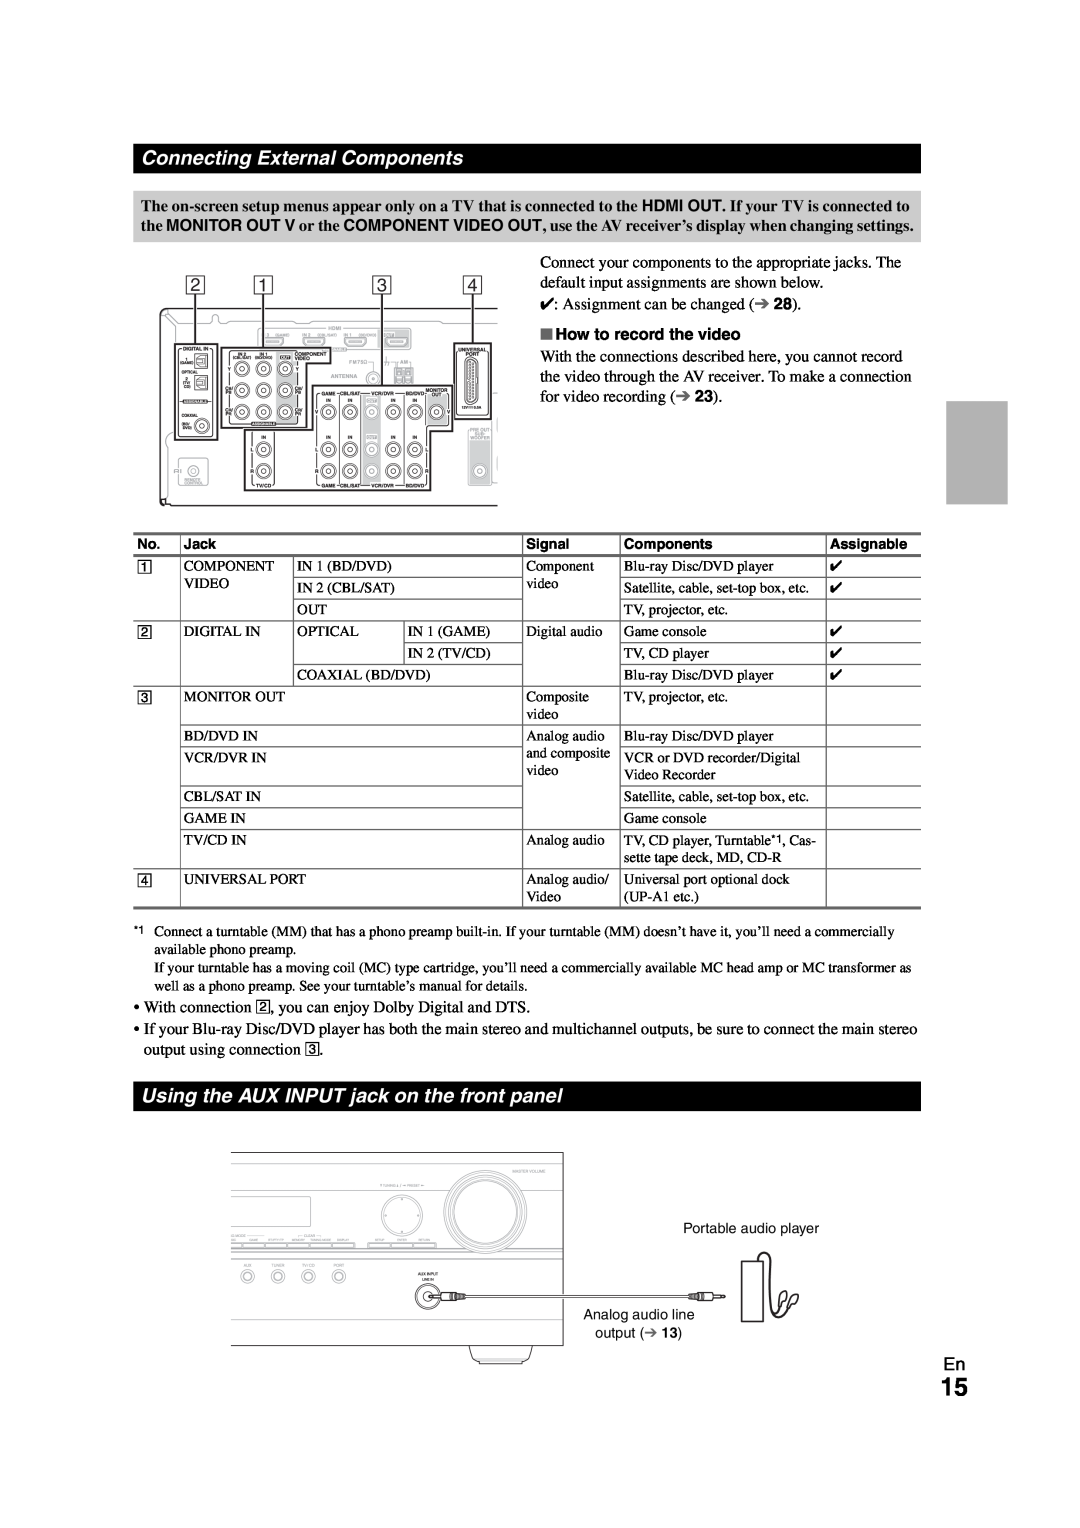 Onkyo 29400468 instruction manual Connecting External Components, Using the AUX INPUT jack on the front panel 